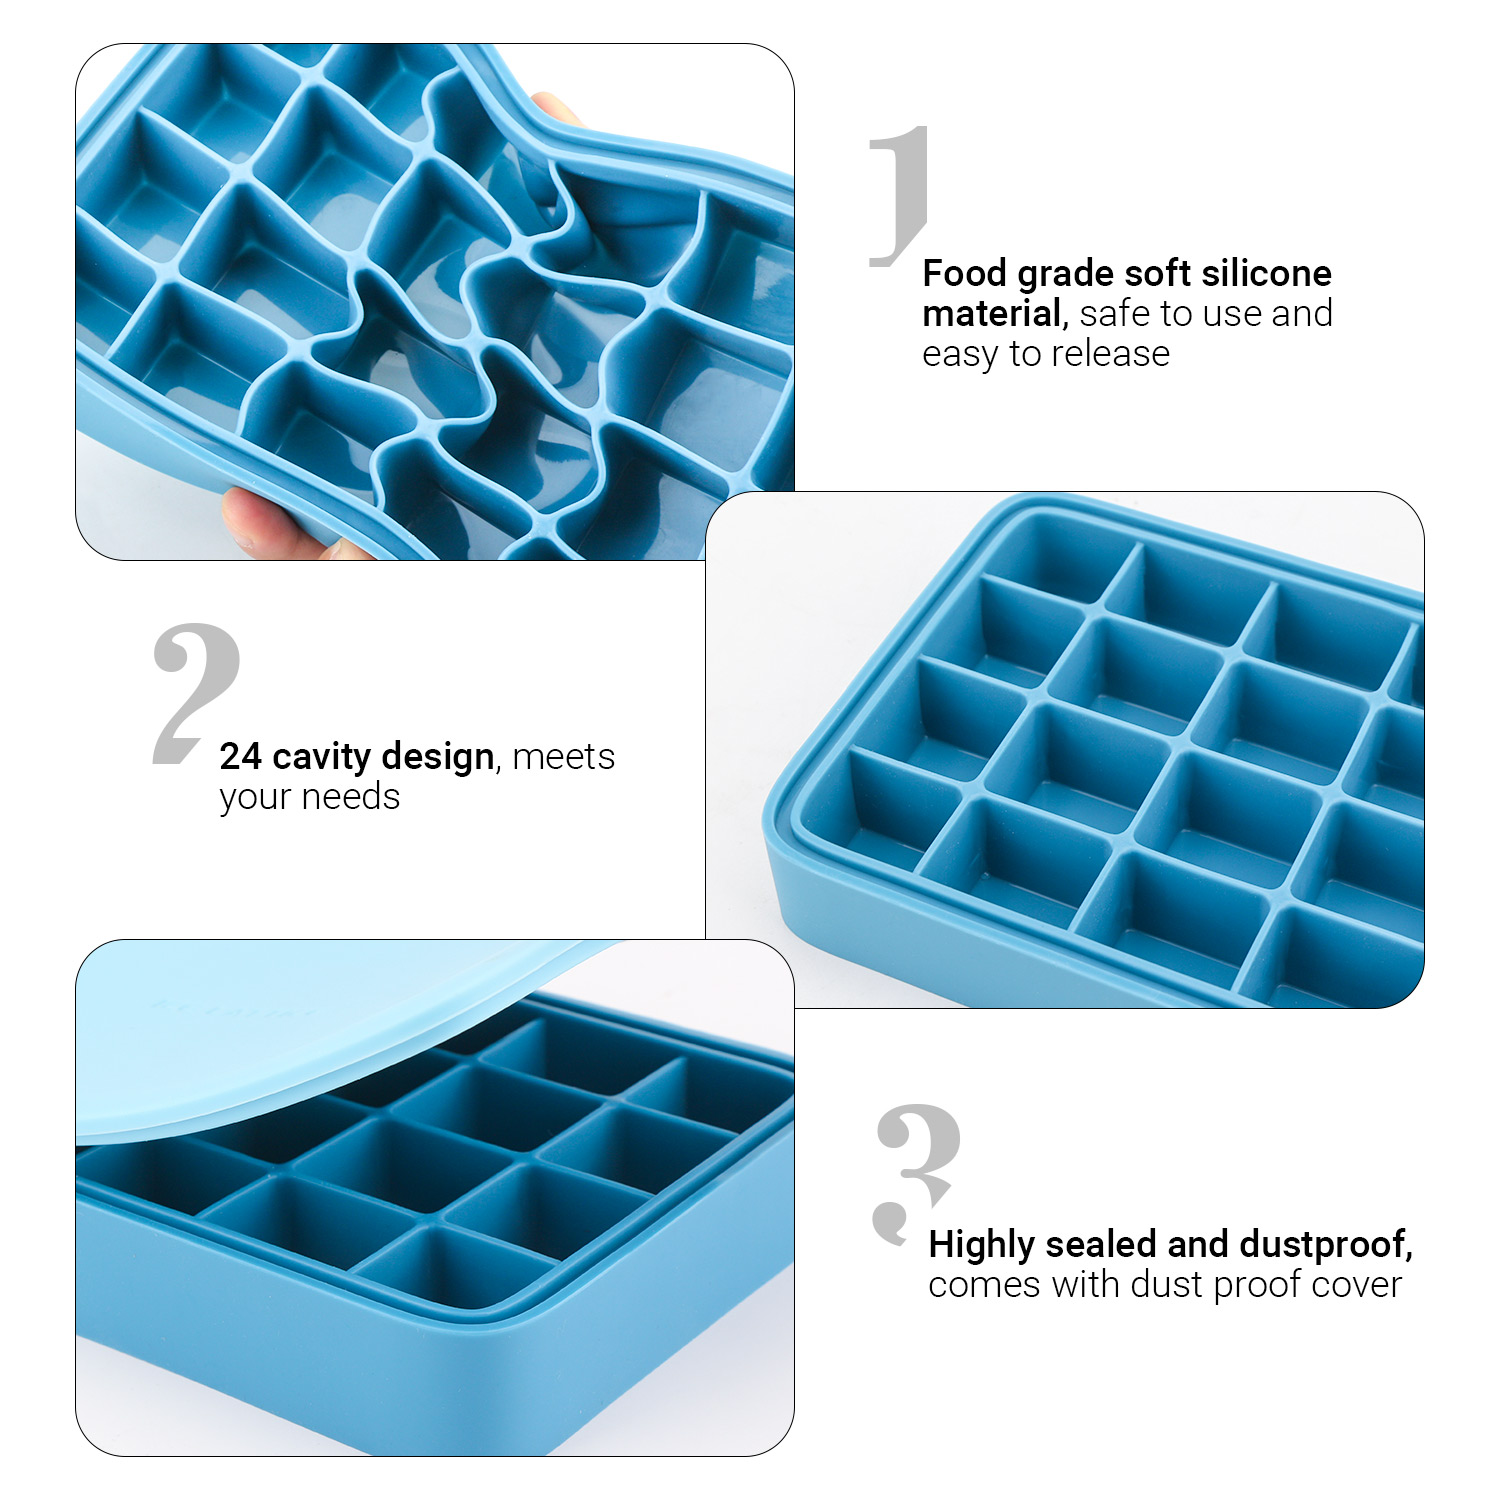 Ice Cube Trays 2Pack, Silicone 15-Square Ice Trays, Easy-Release Ice Cube  Molds with Lid for Drinks Cocktail Whiskey